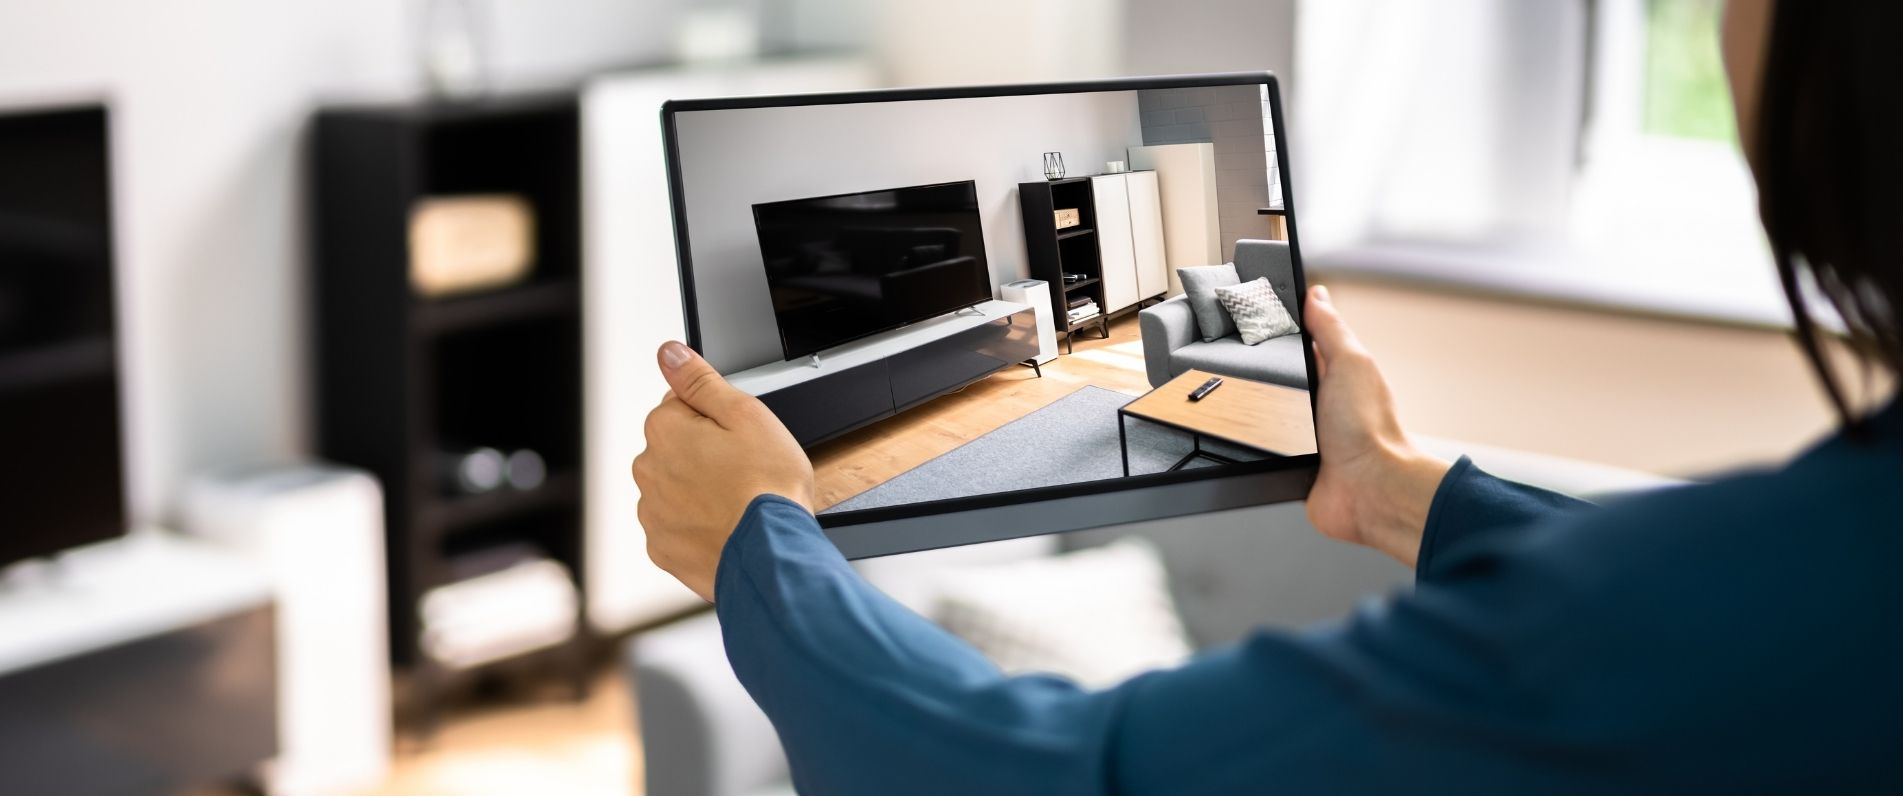 5 Mistakes To Avoid When Making a Home Virtual Tour